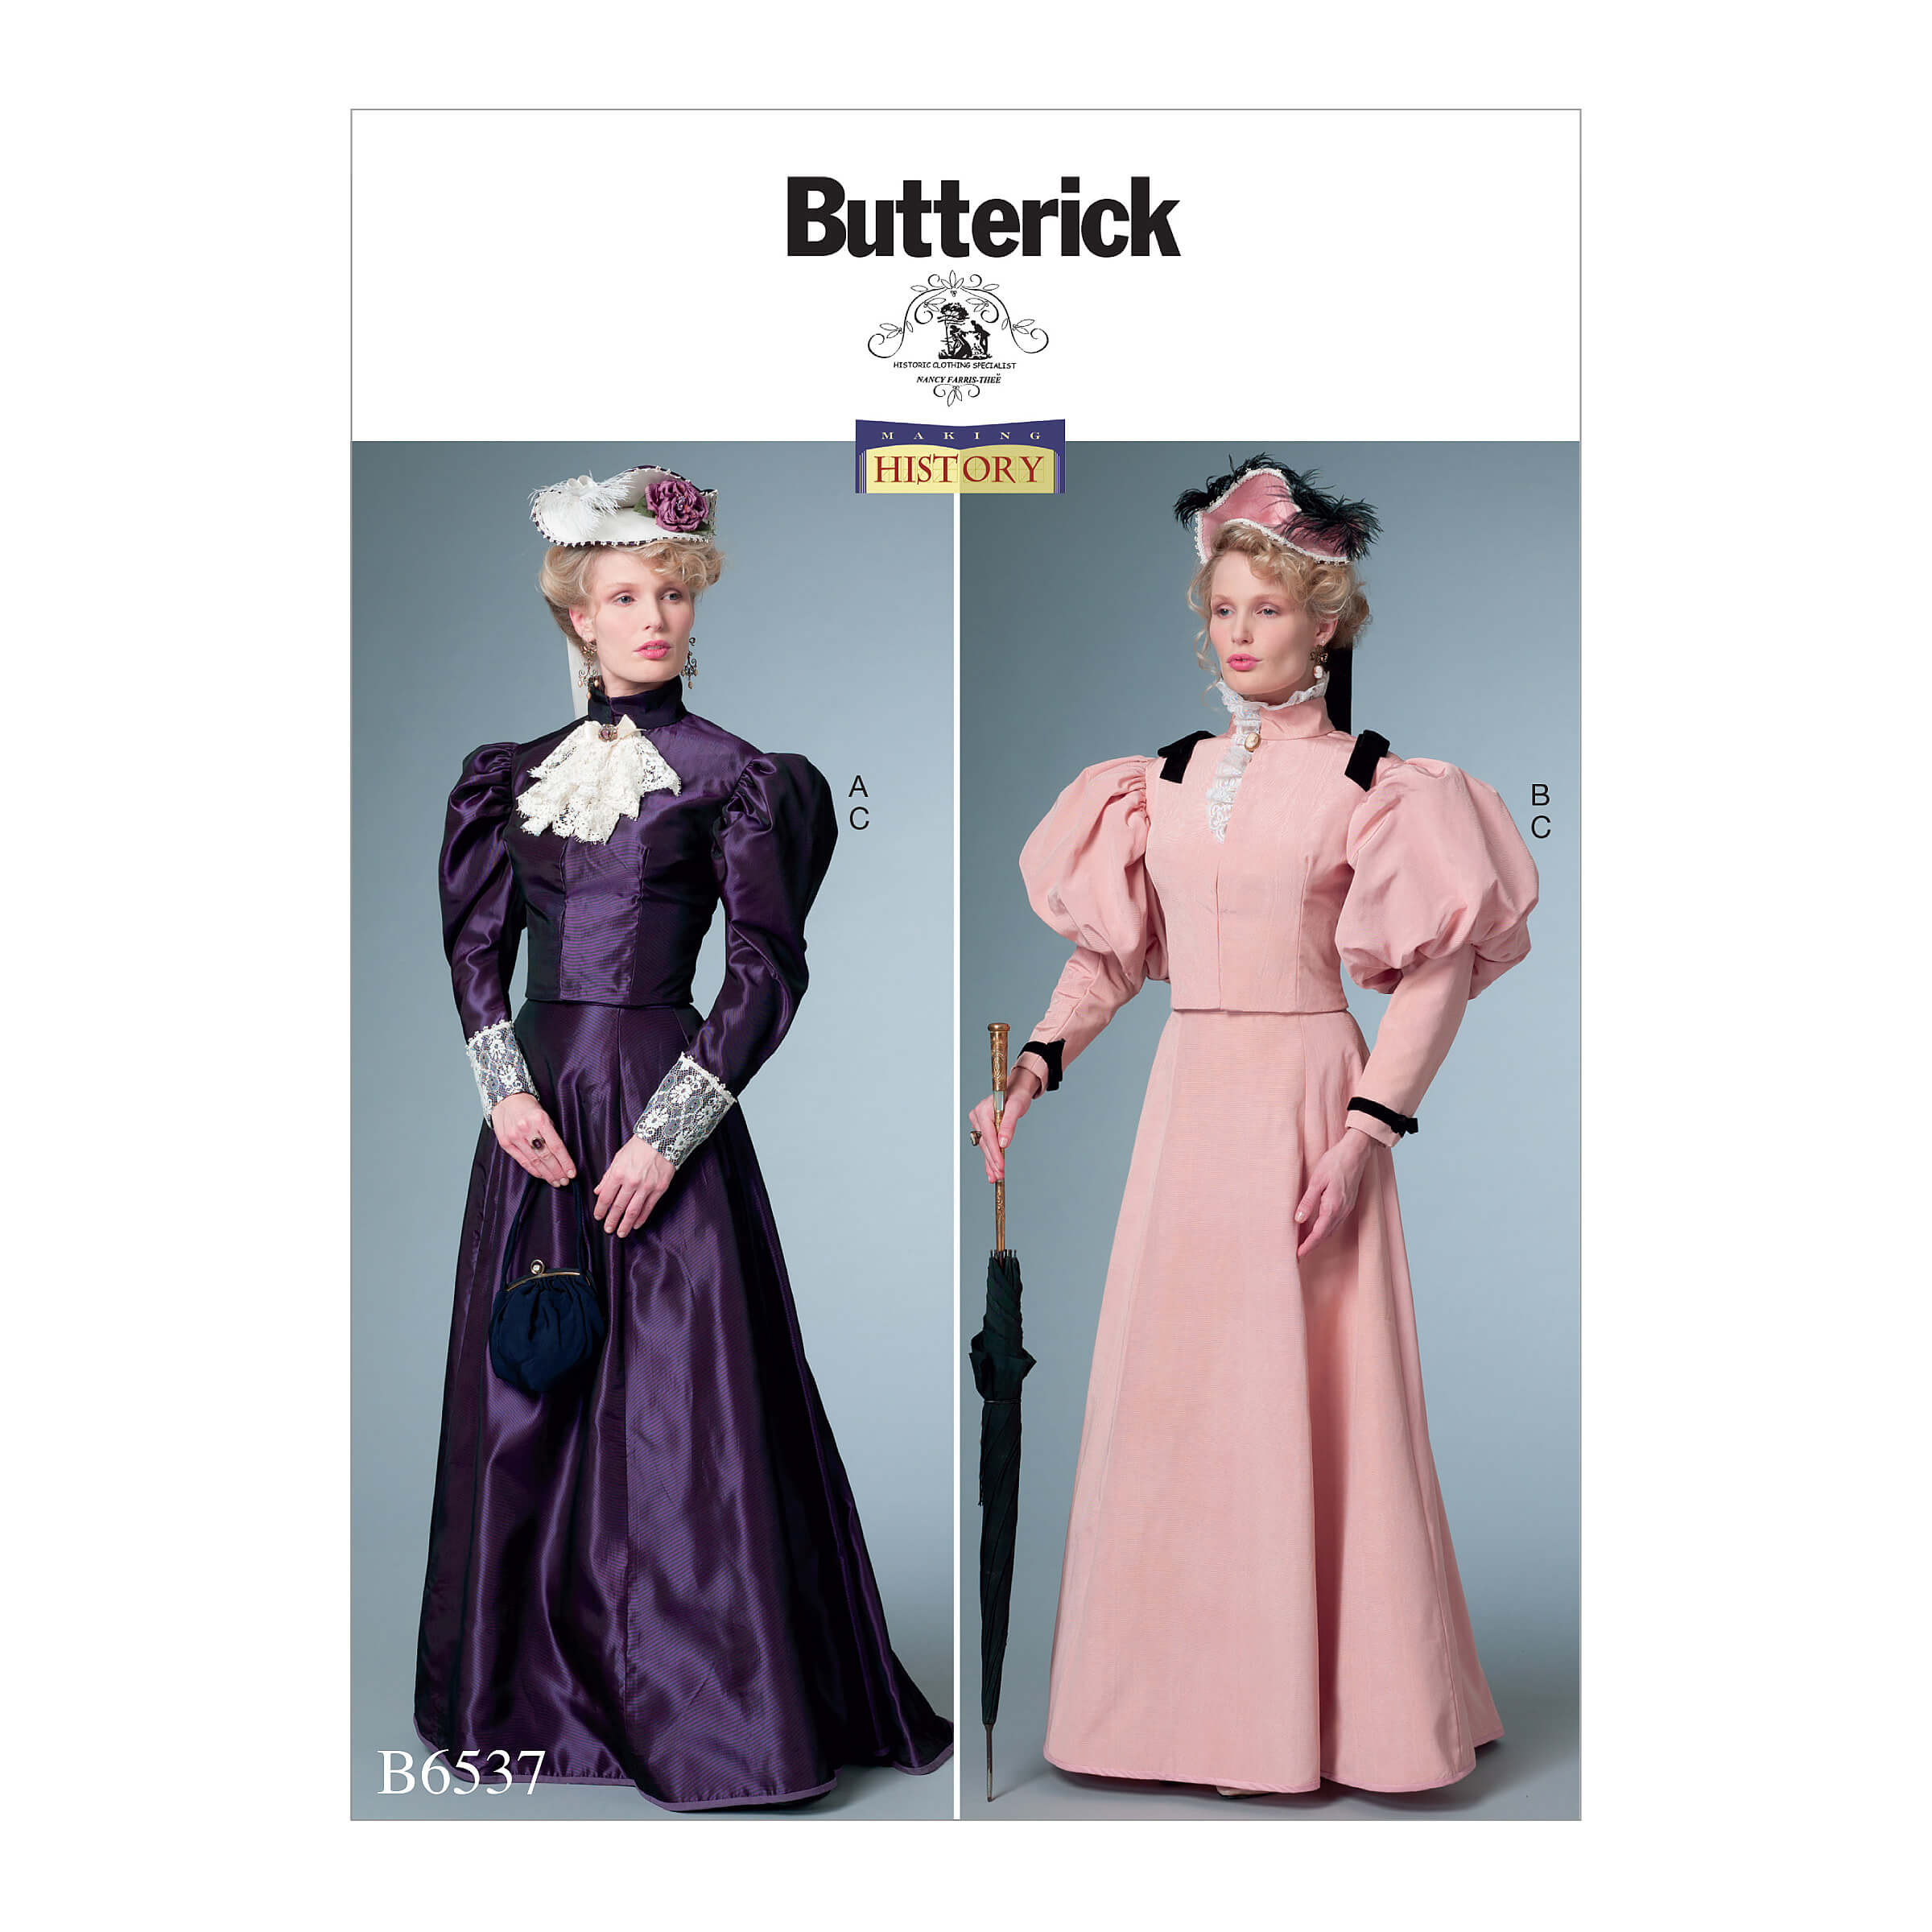 Butterick Sewing Pattern B6537 Misses' Costume